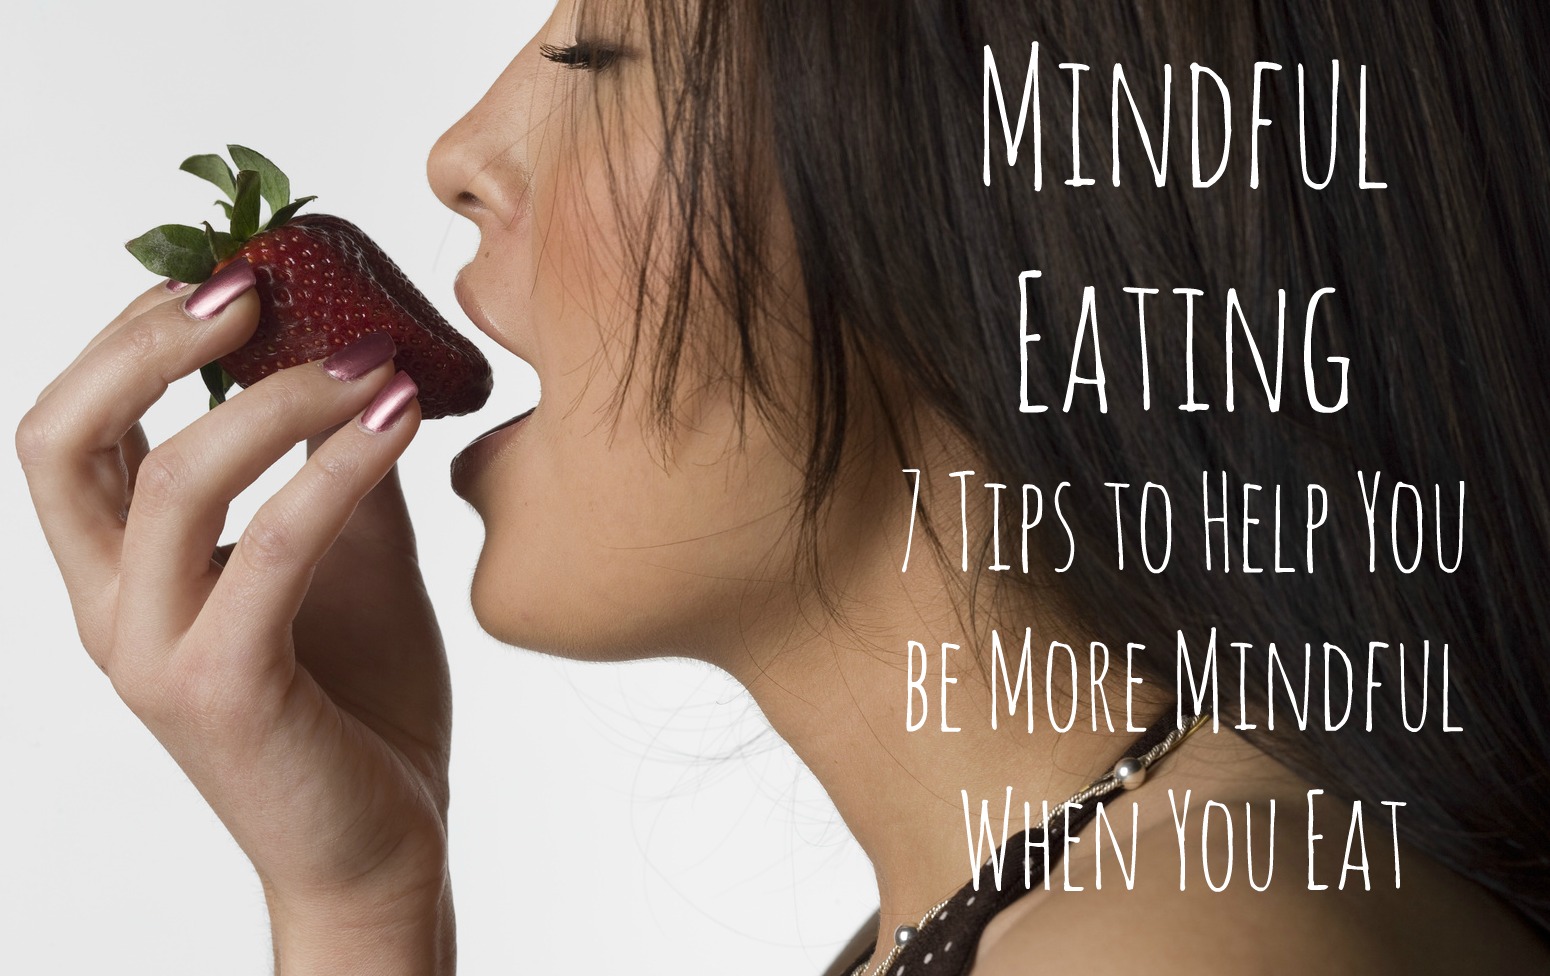 "Mindful Eating: Nourish Your Body and Soul with Every Bite"